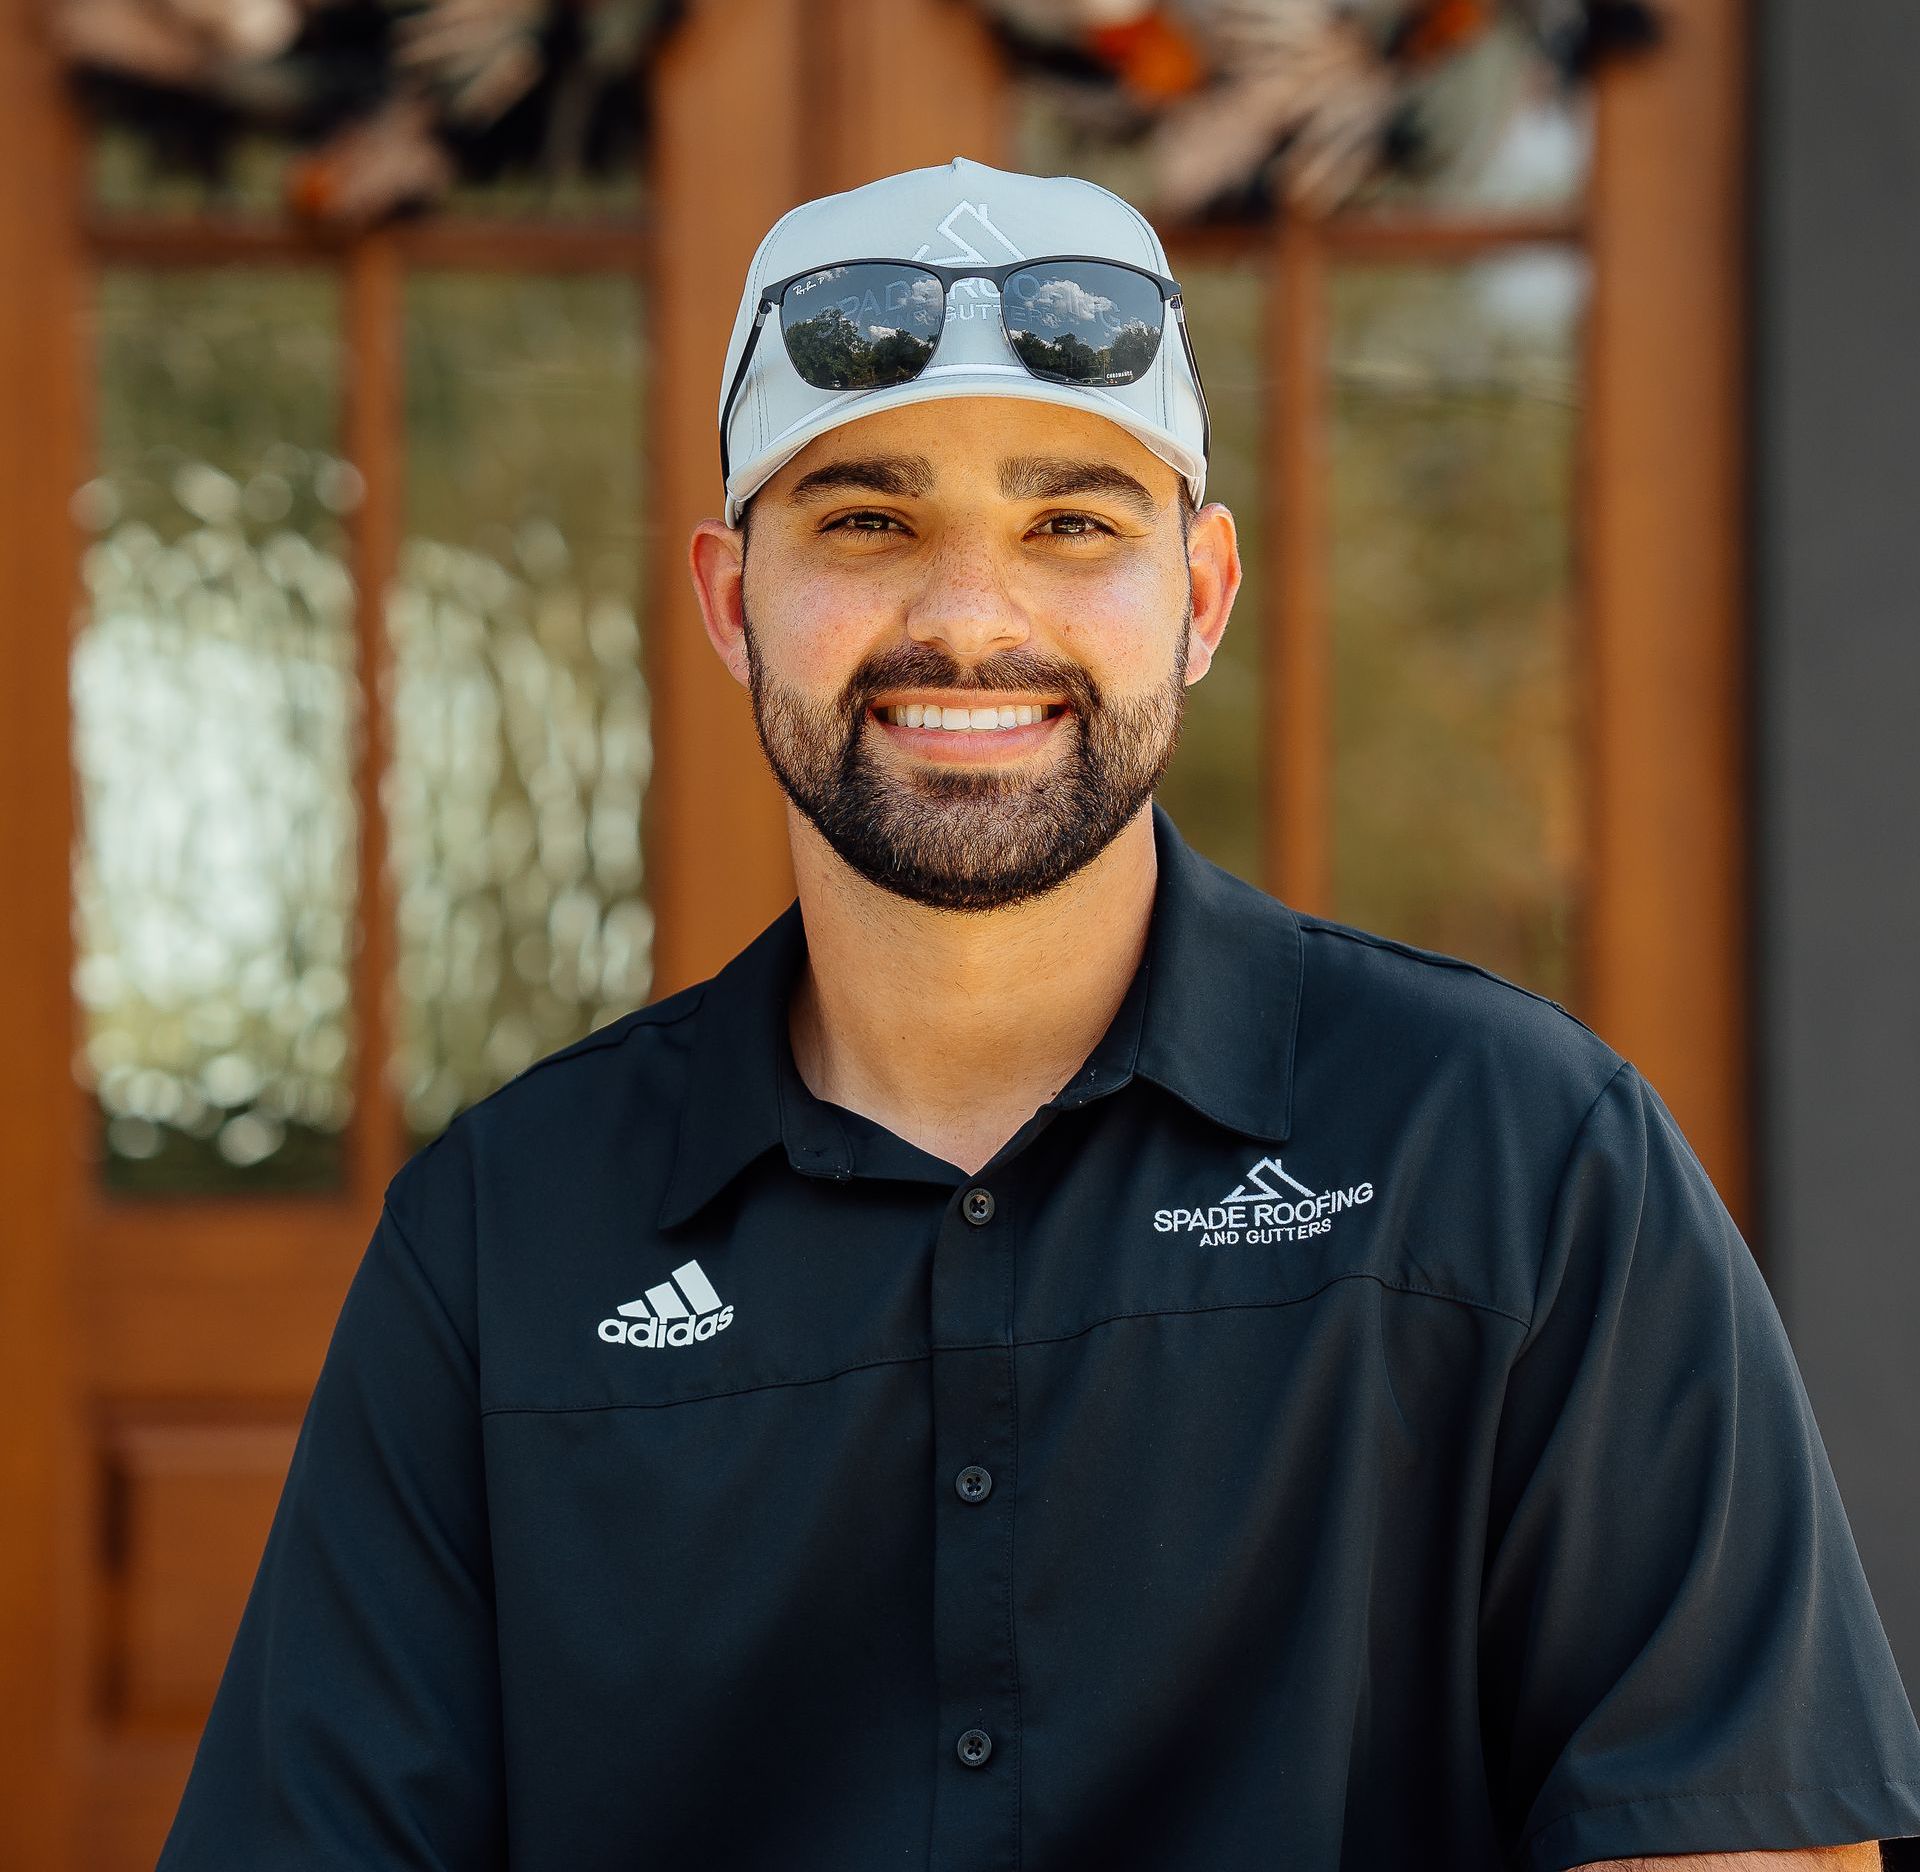 Reese Fierro, Roofing Consultant of Spade Roofing and Gutters